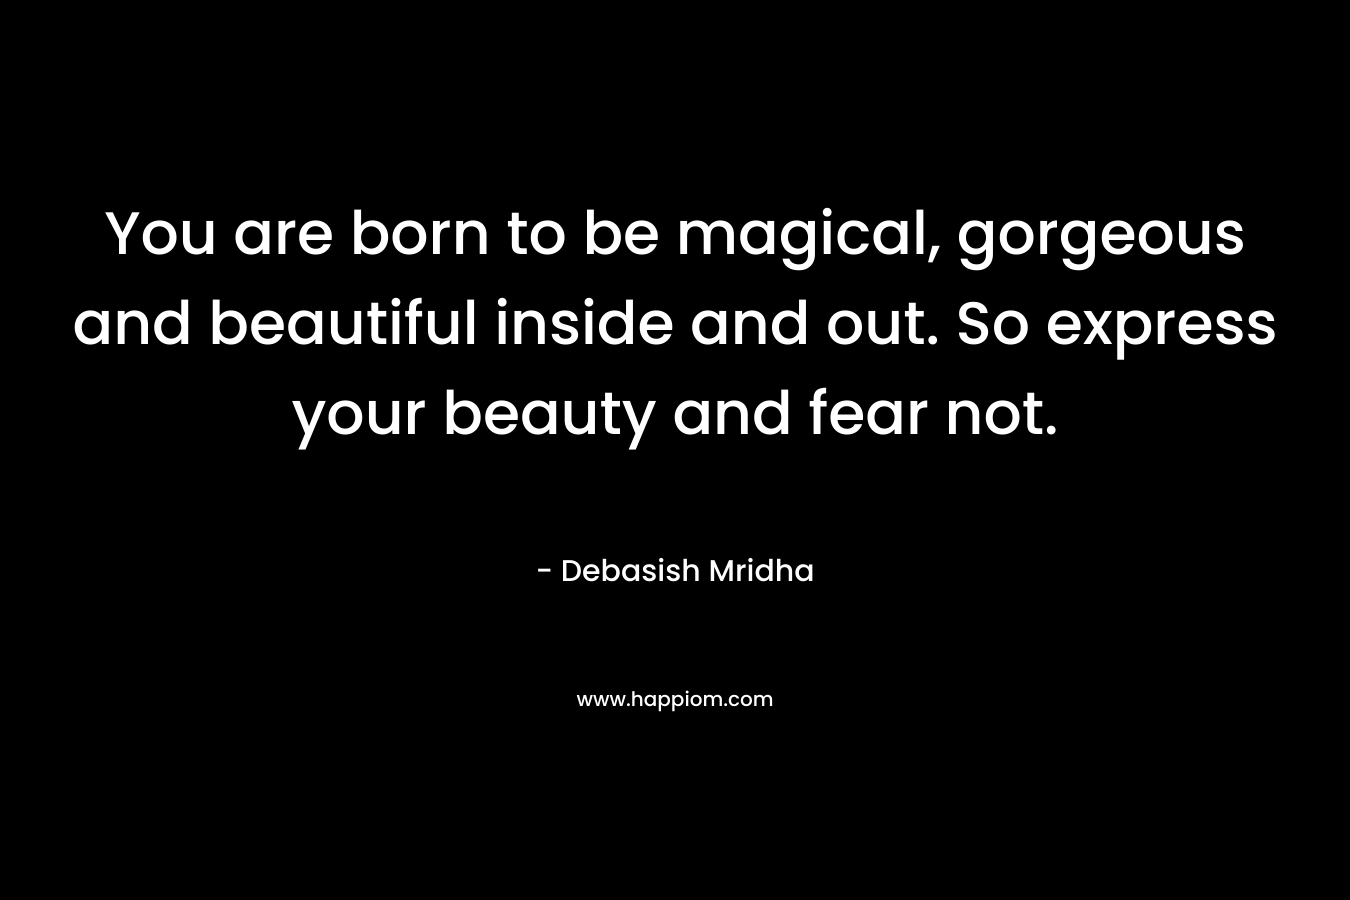 You are born to be magical, gorgeous and beautiful inside and out. So express your beauty and fear not.